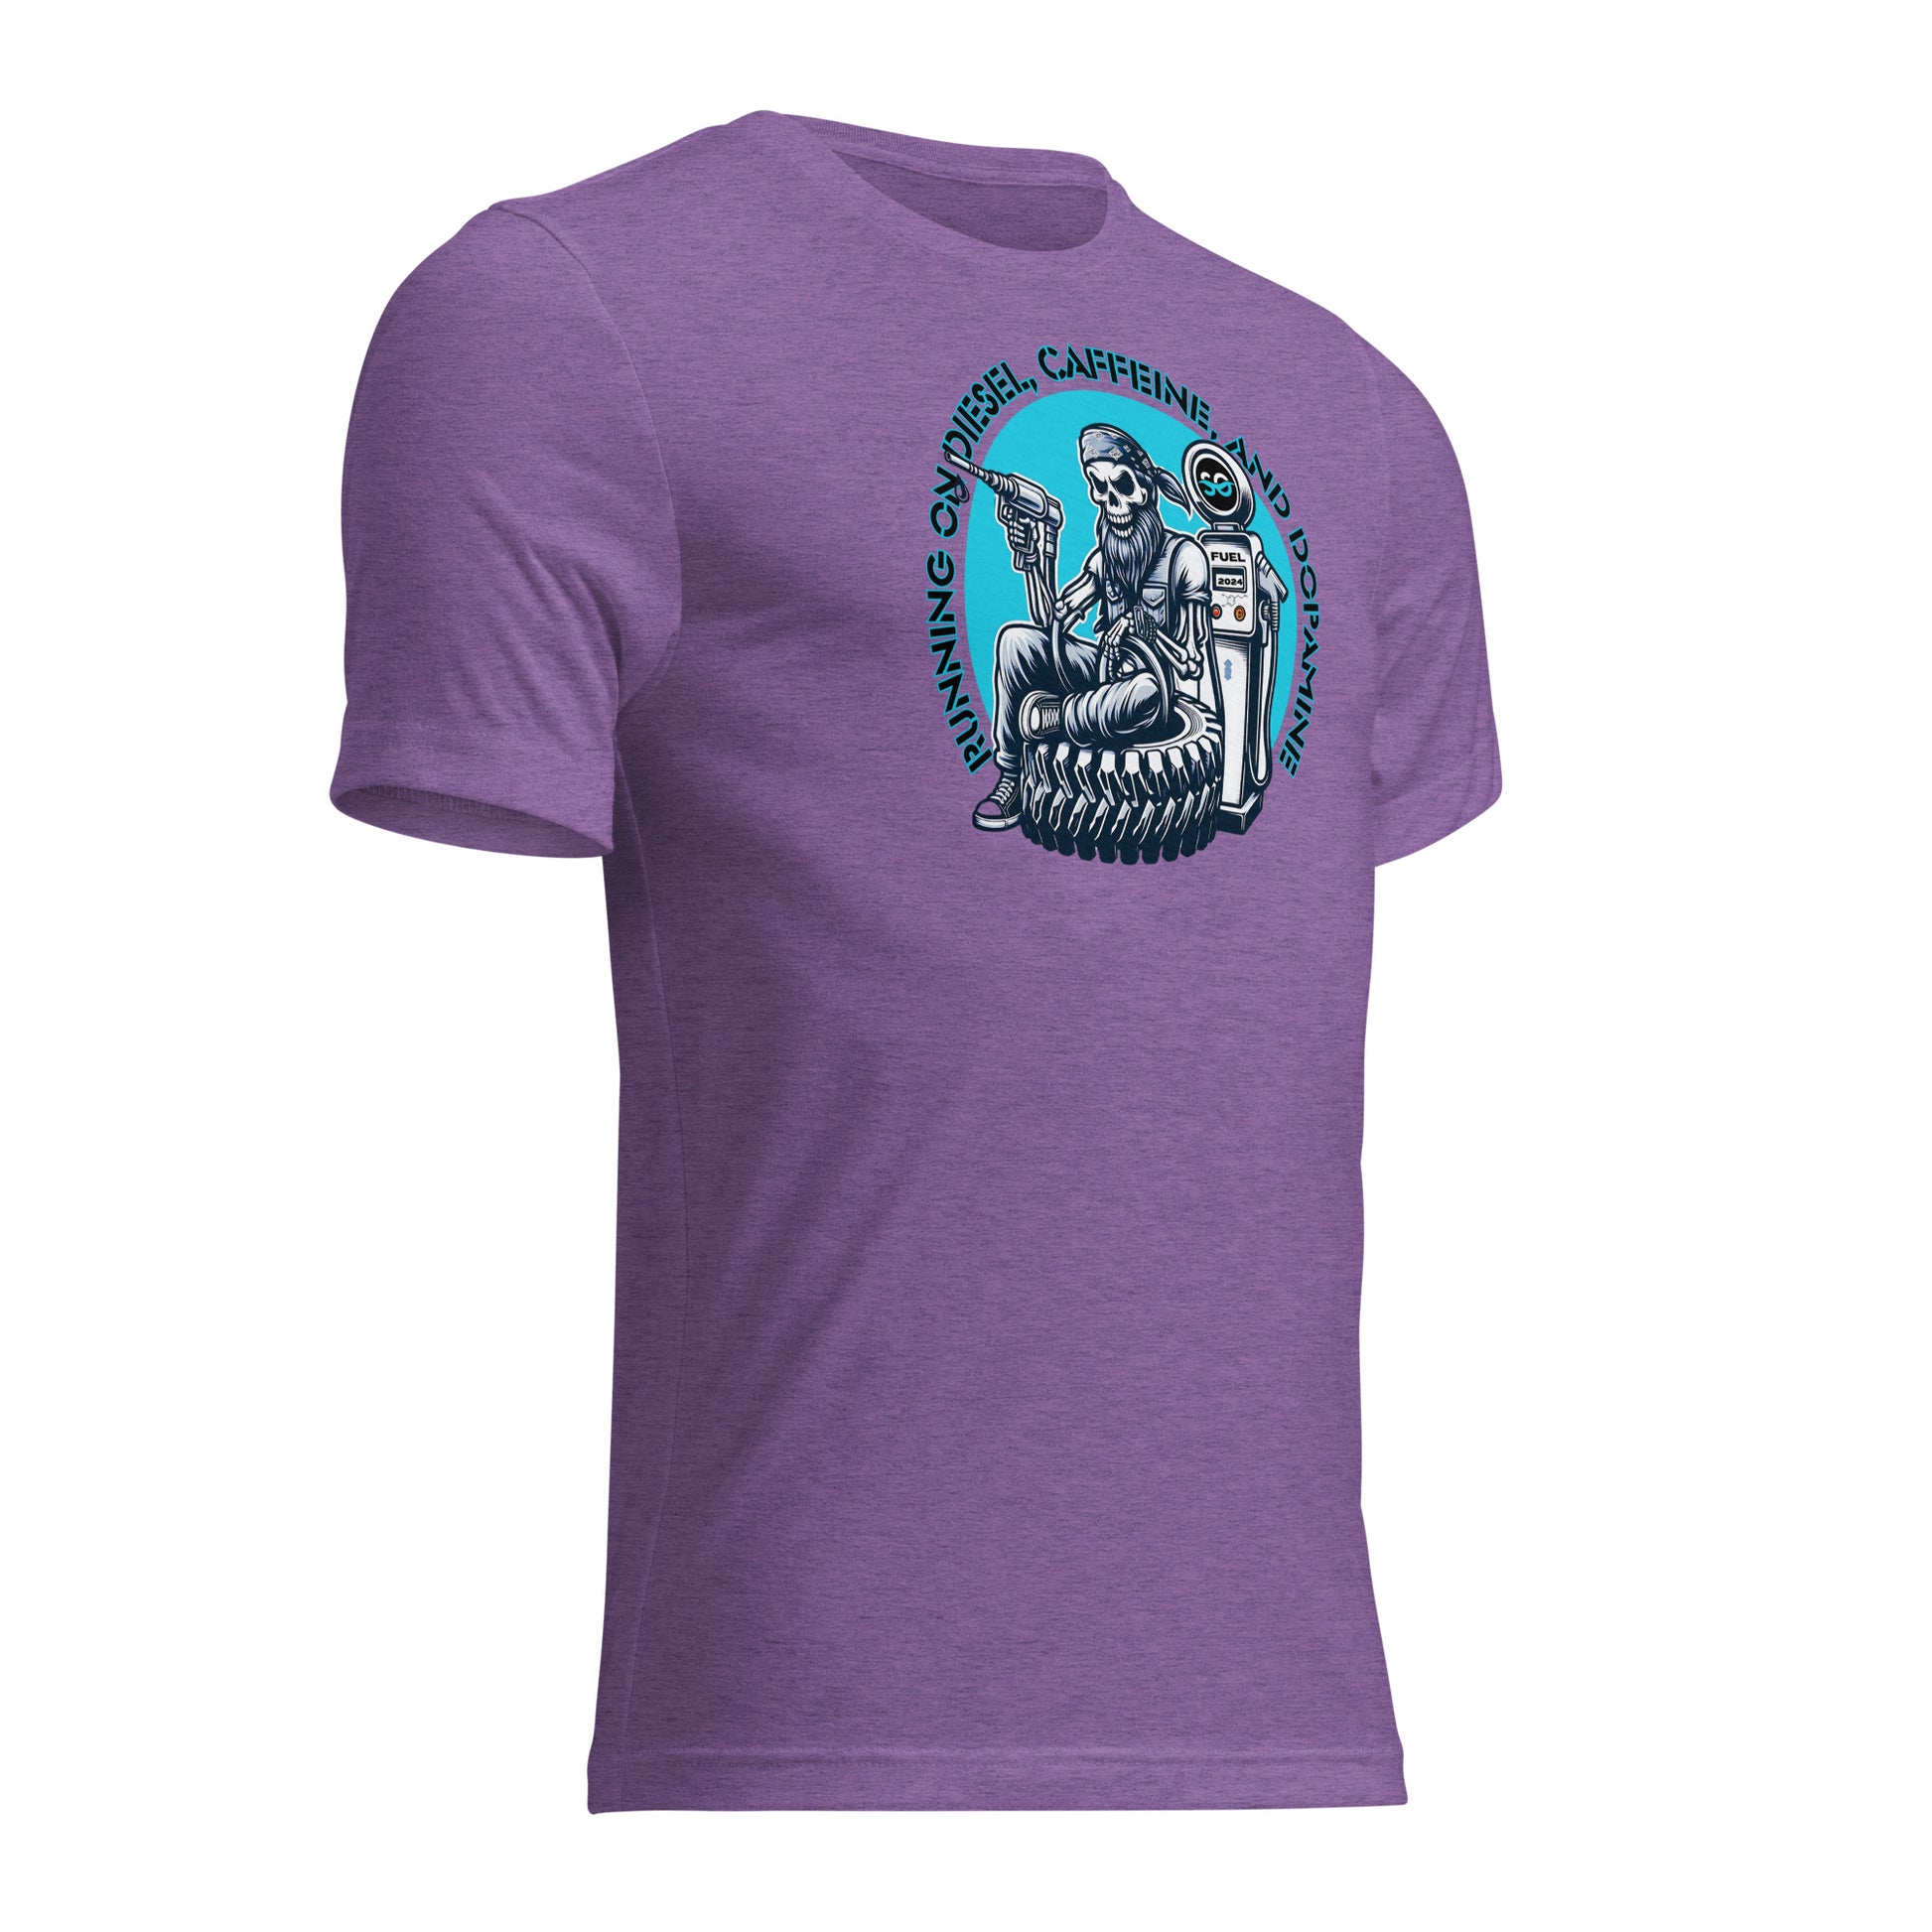 a purple t - shirt with a picture of a man on a motorcycle